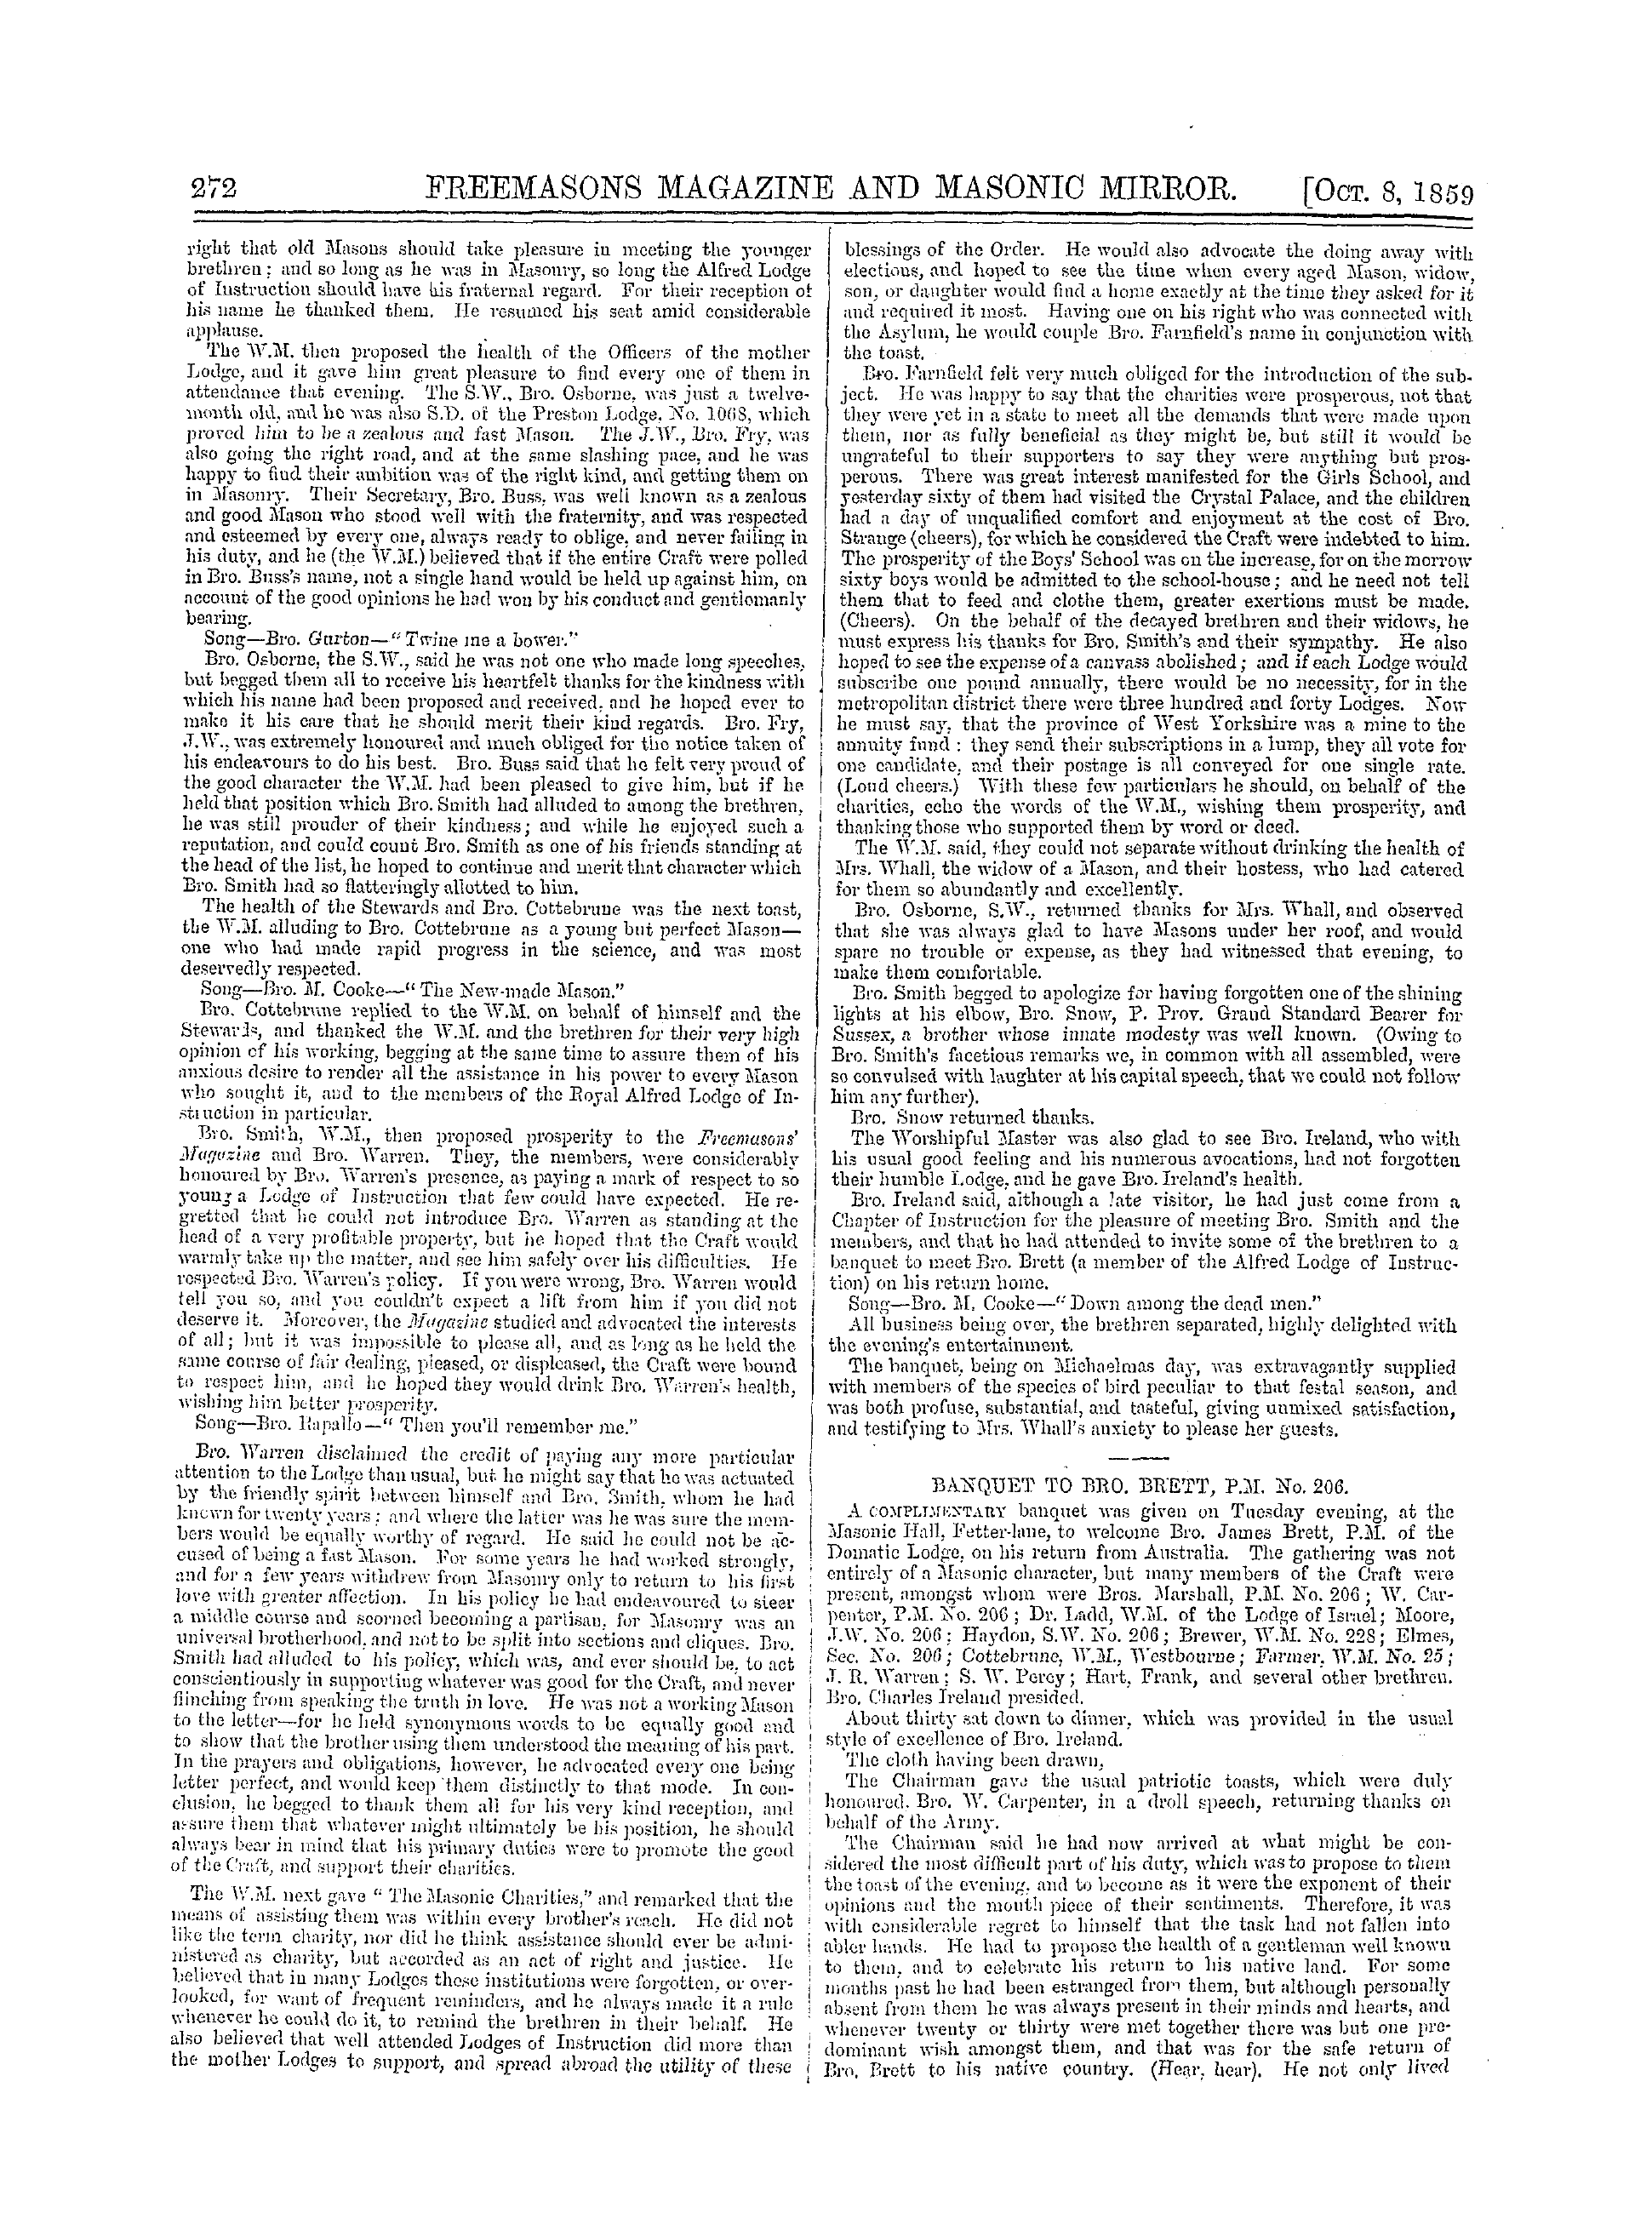 Page 12